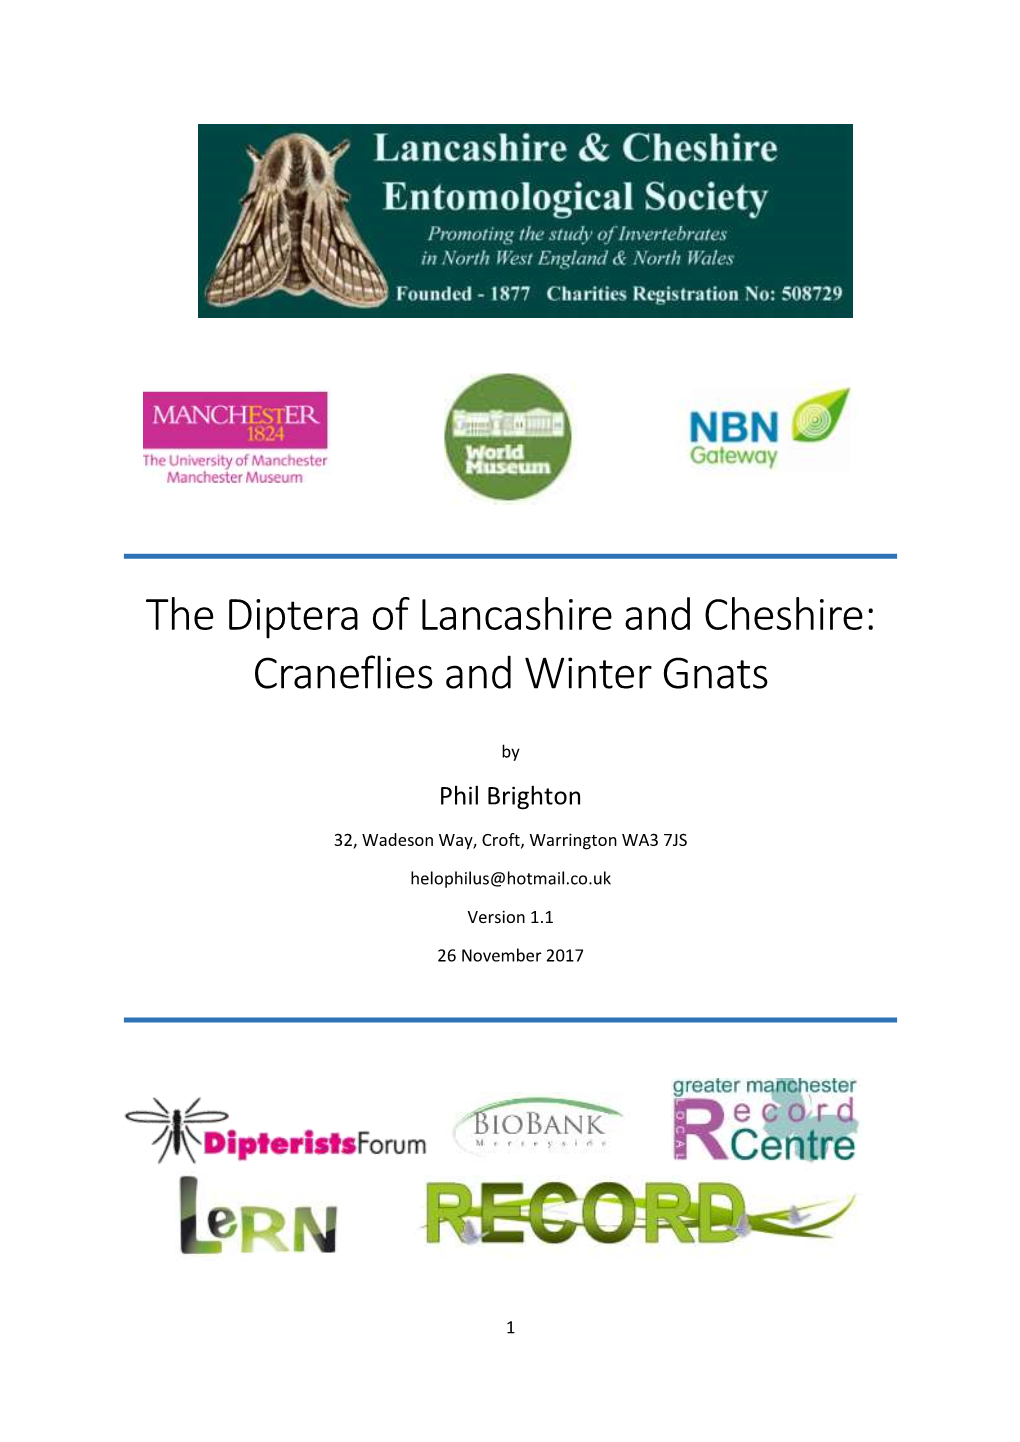 The Diptera of Lancashire and Cheshire: Craneflies and Winter Gnats